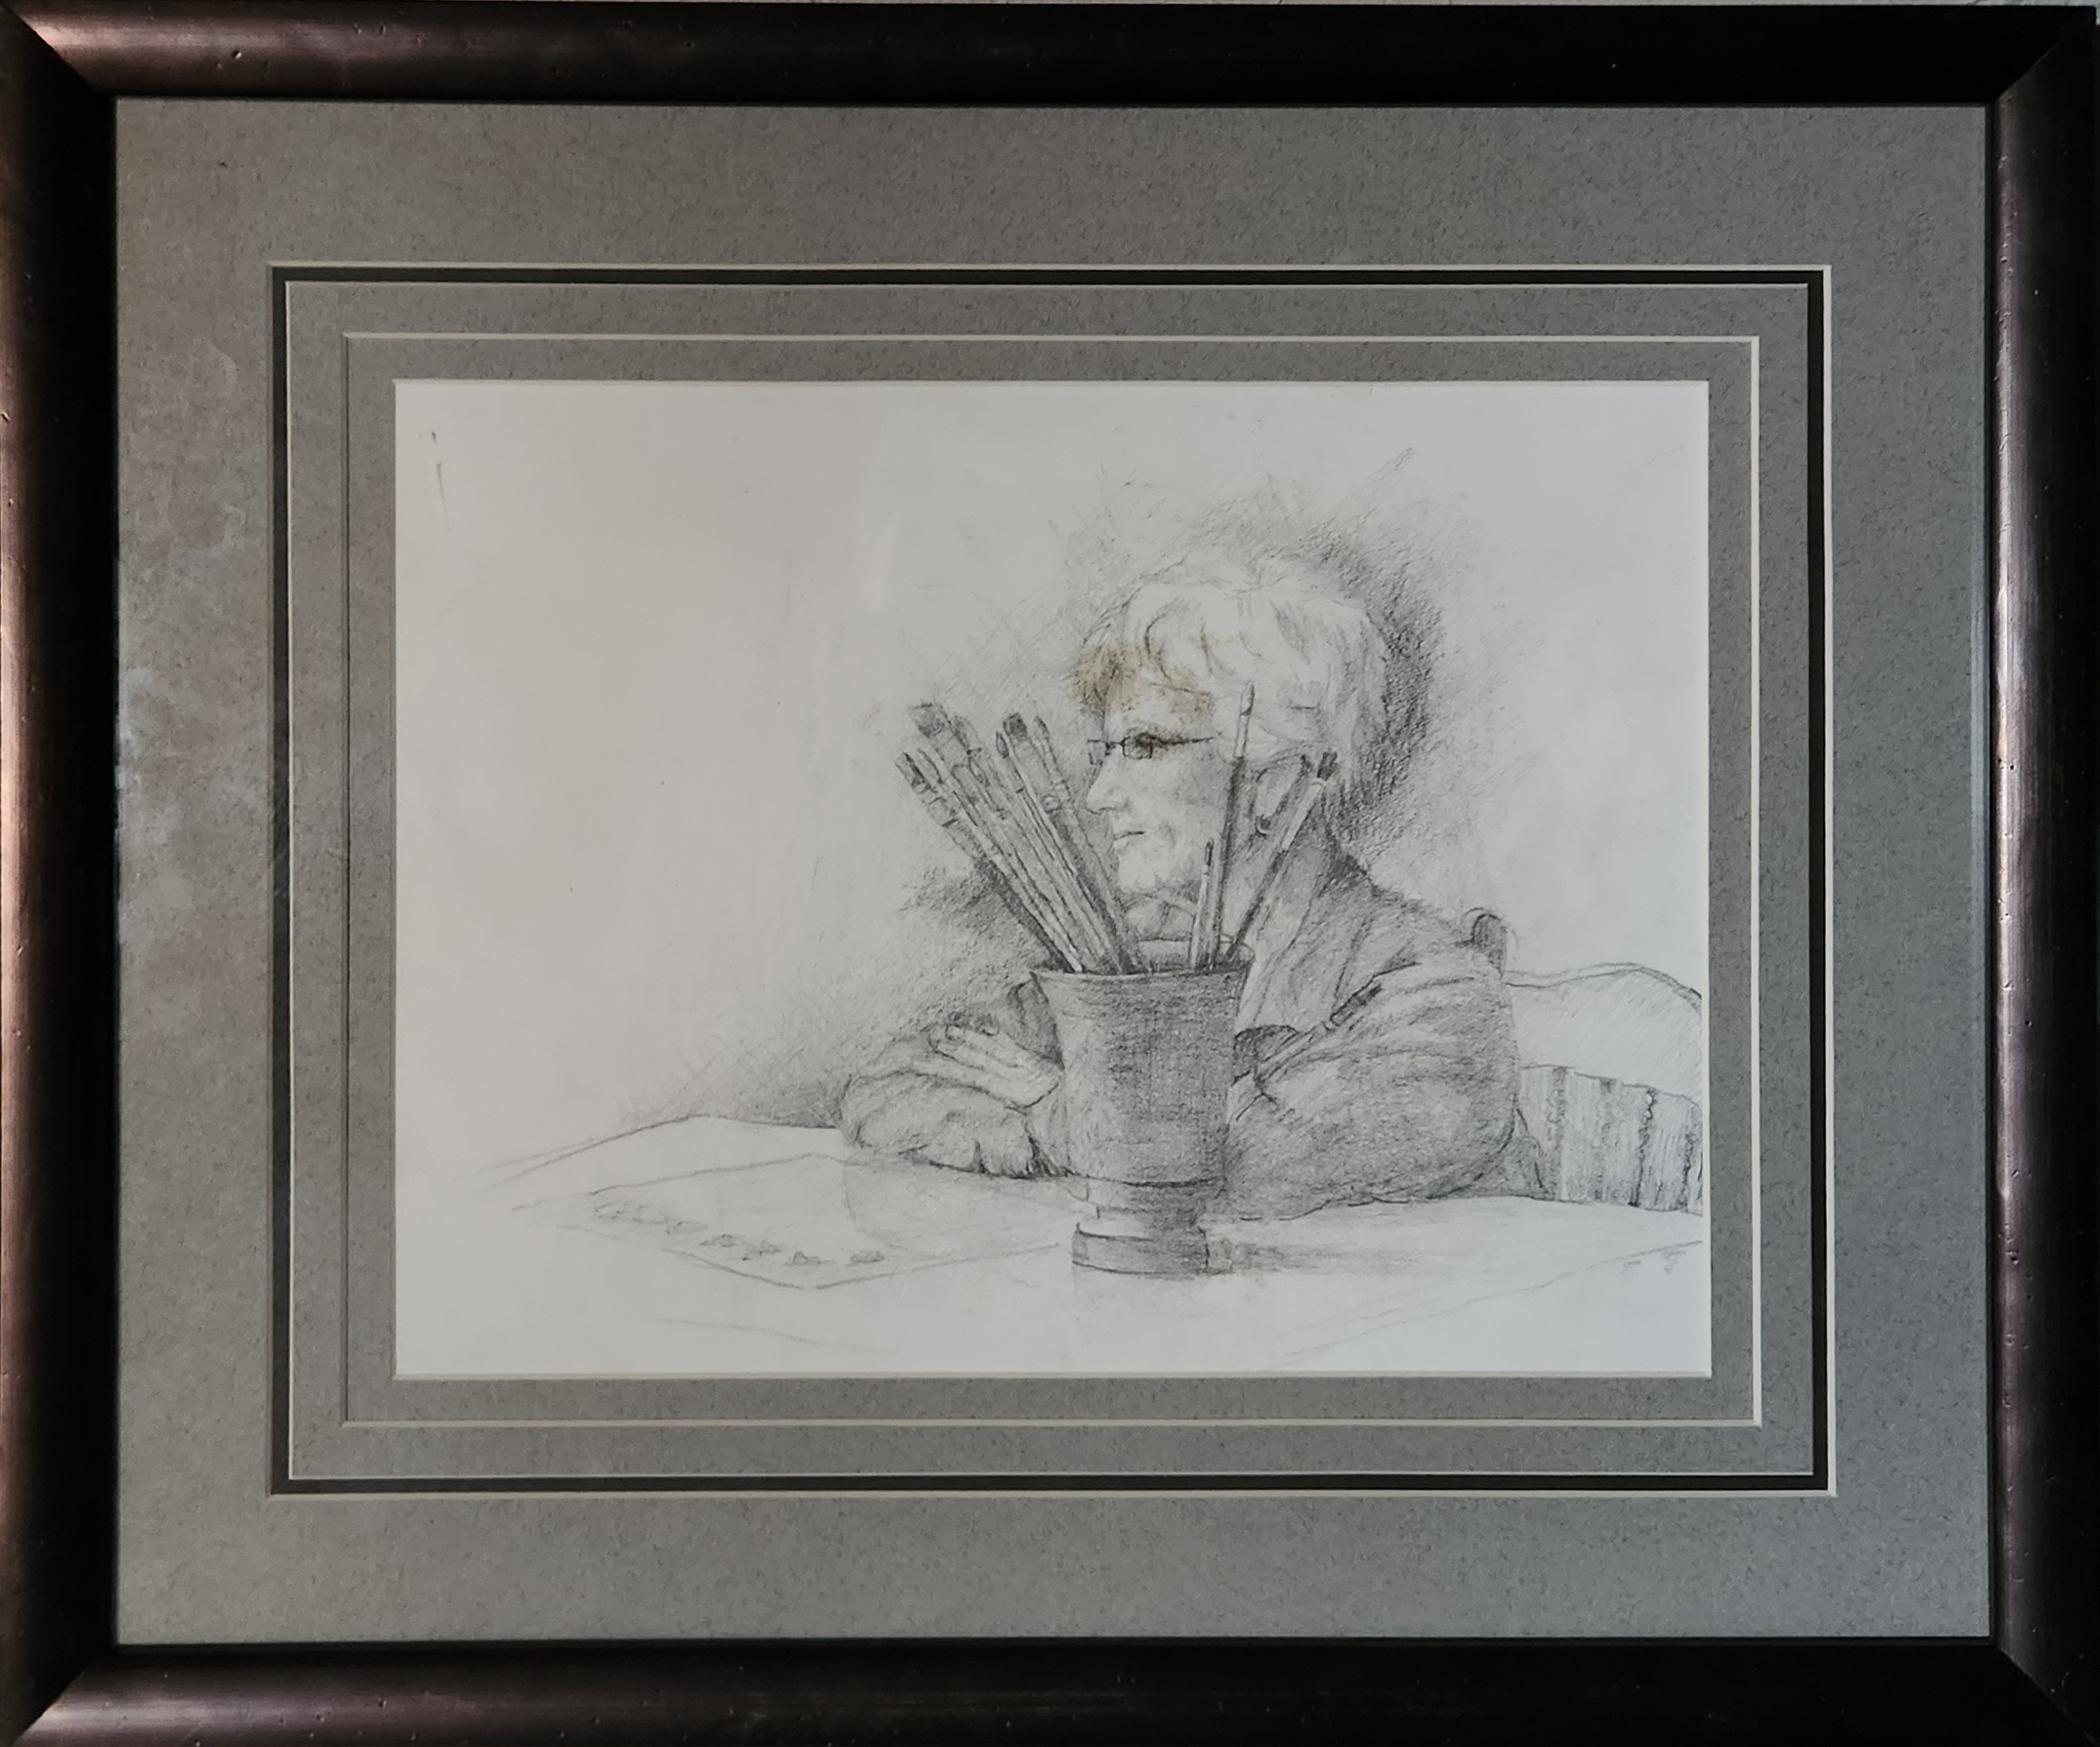 Lu Haskew Still-Life - Self With Brushes, 9x11" pencil